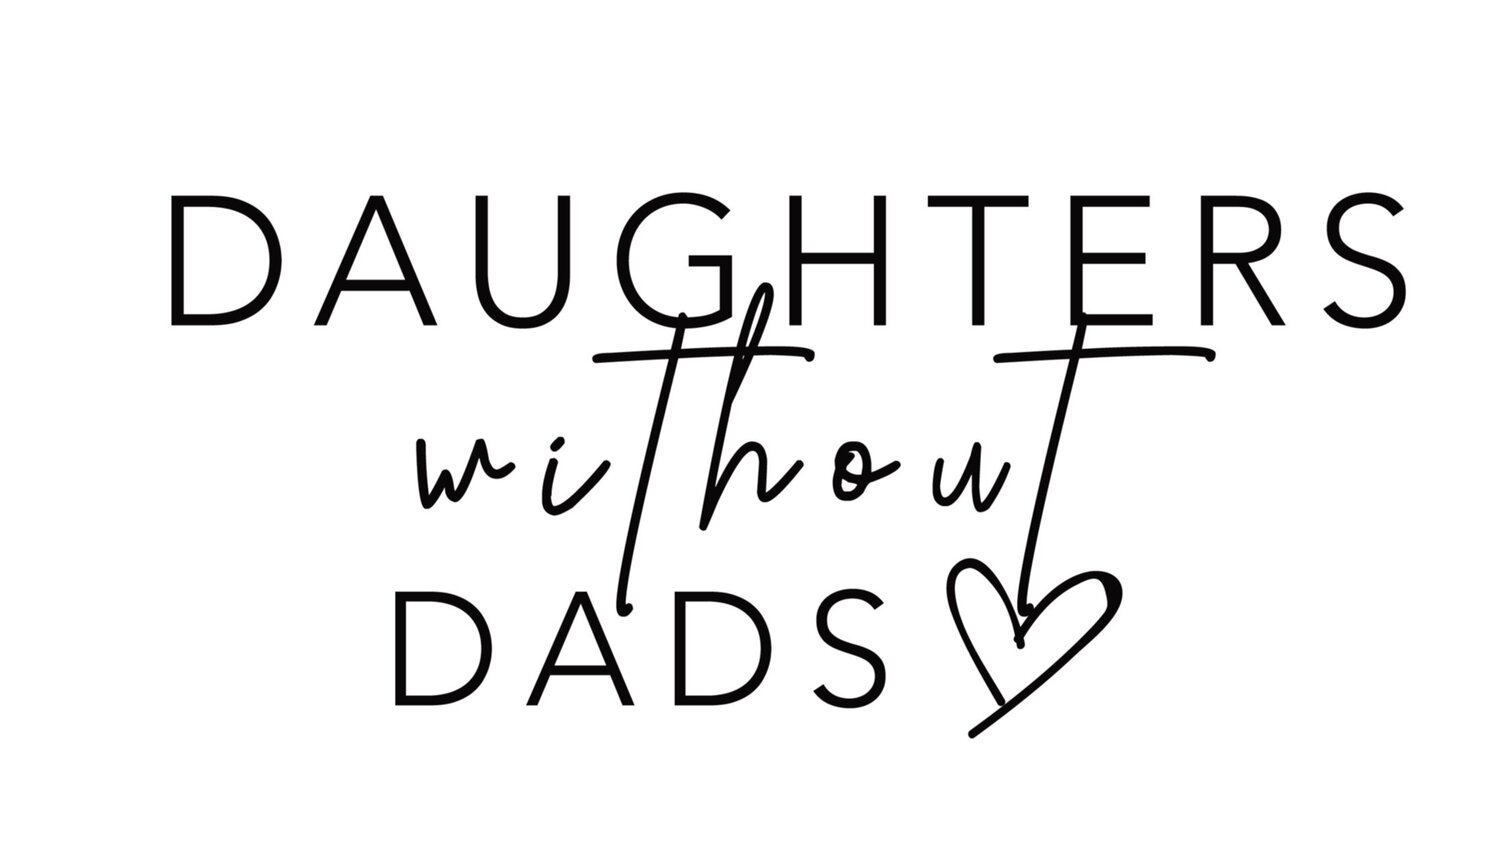 Daughters without Dads